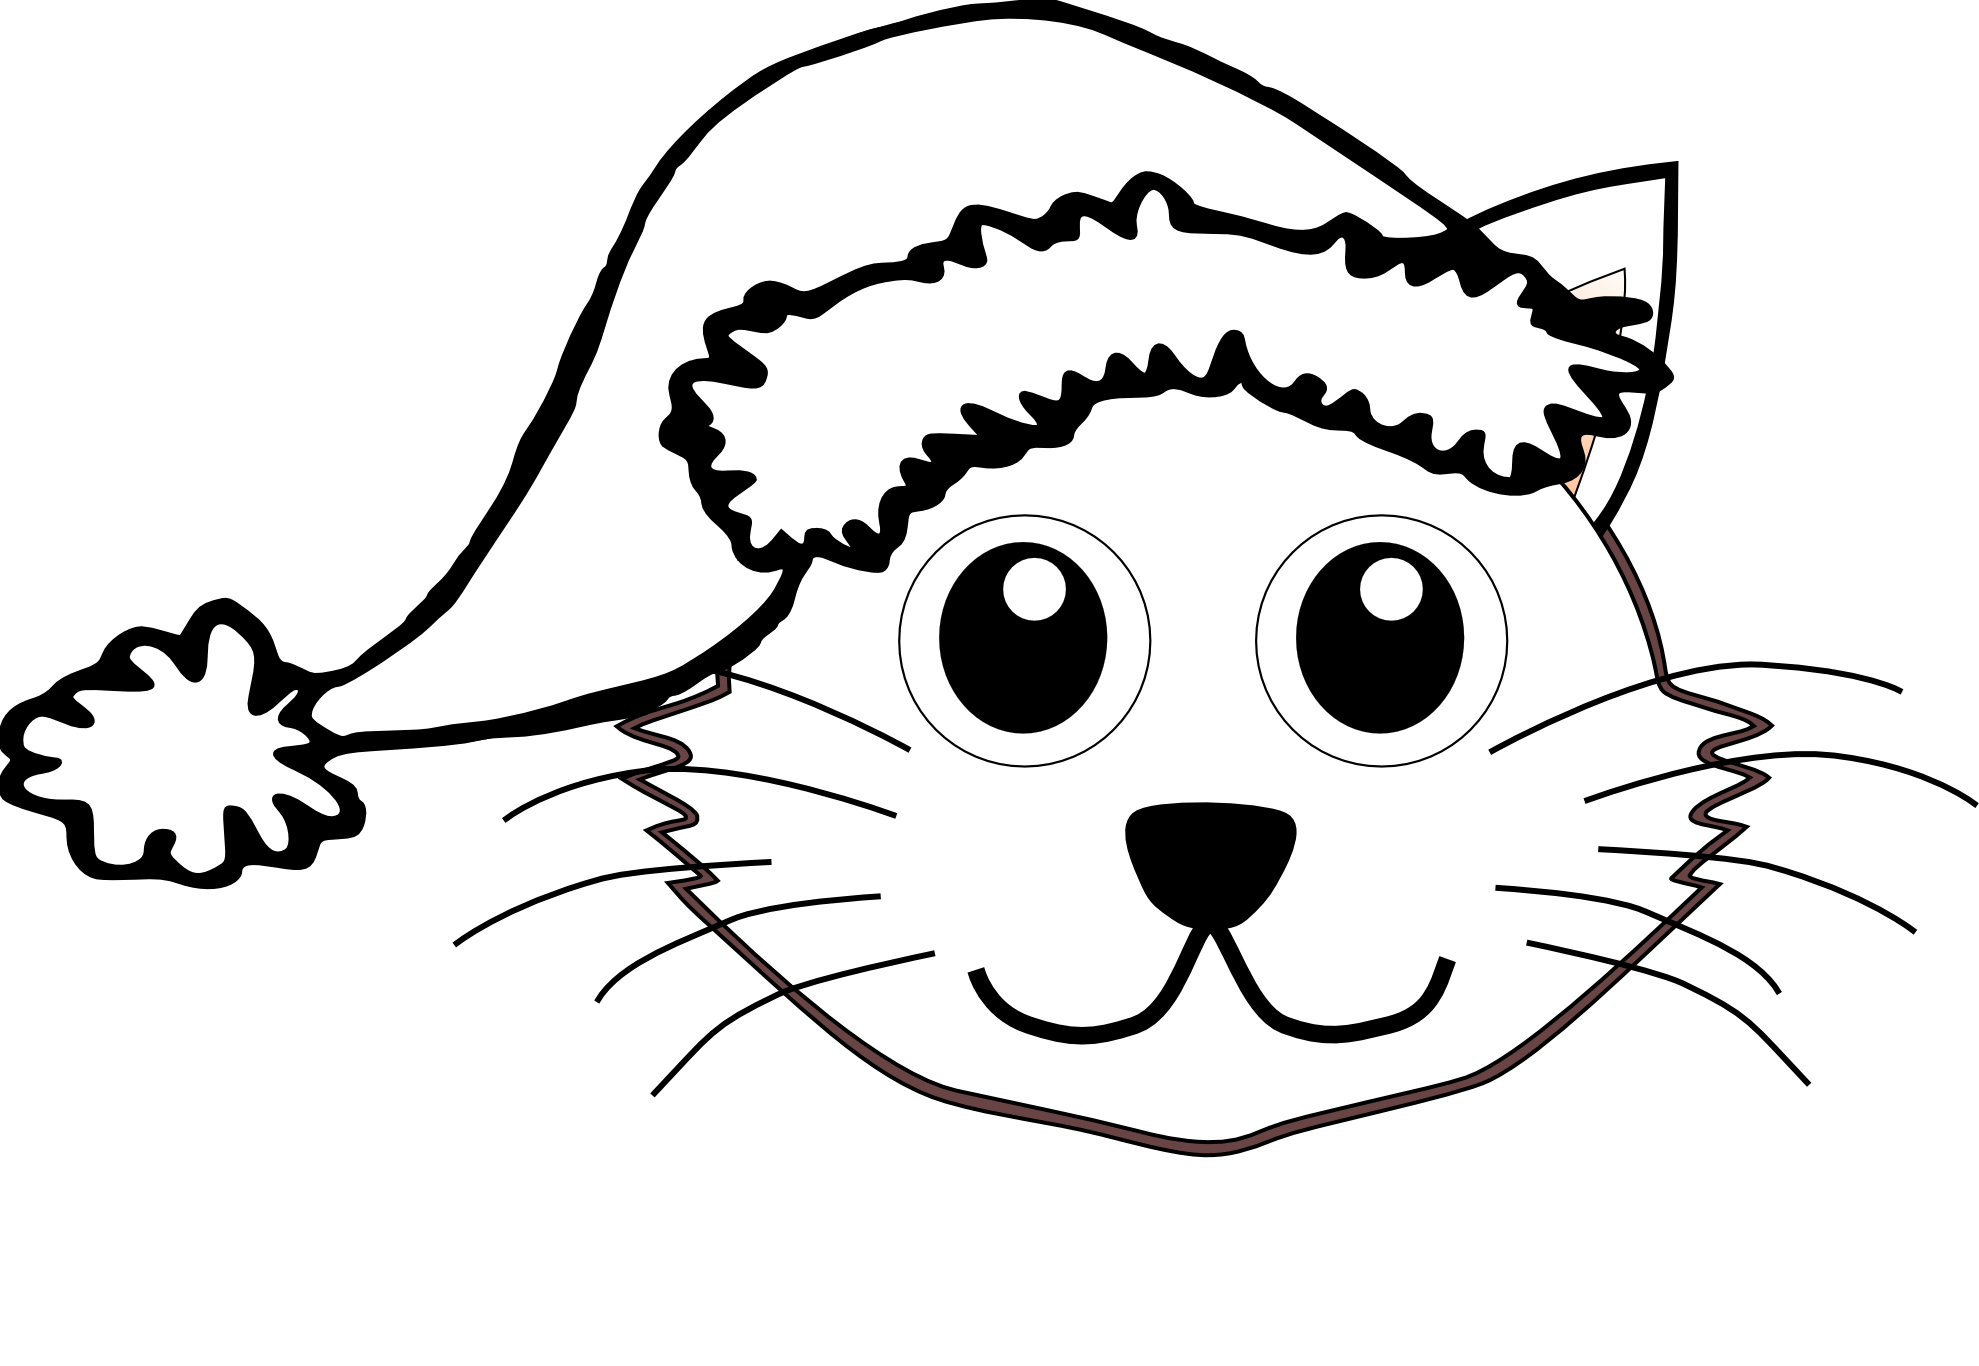 Pirate hat black and. Clipart face boston terrier